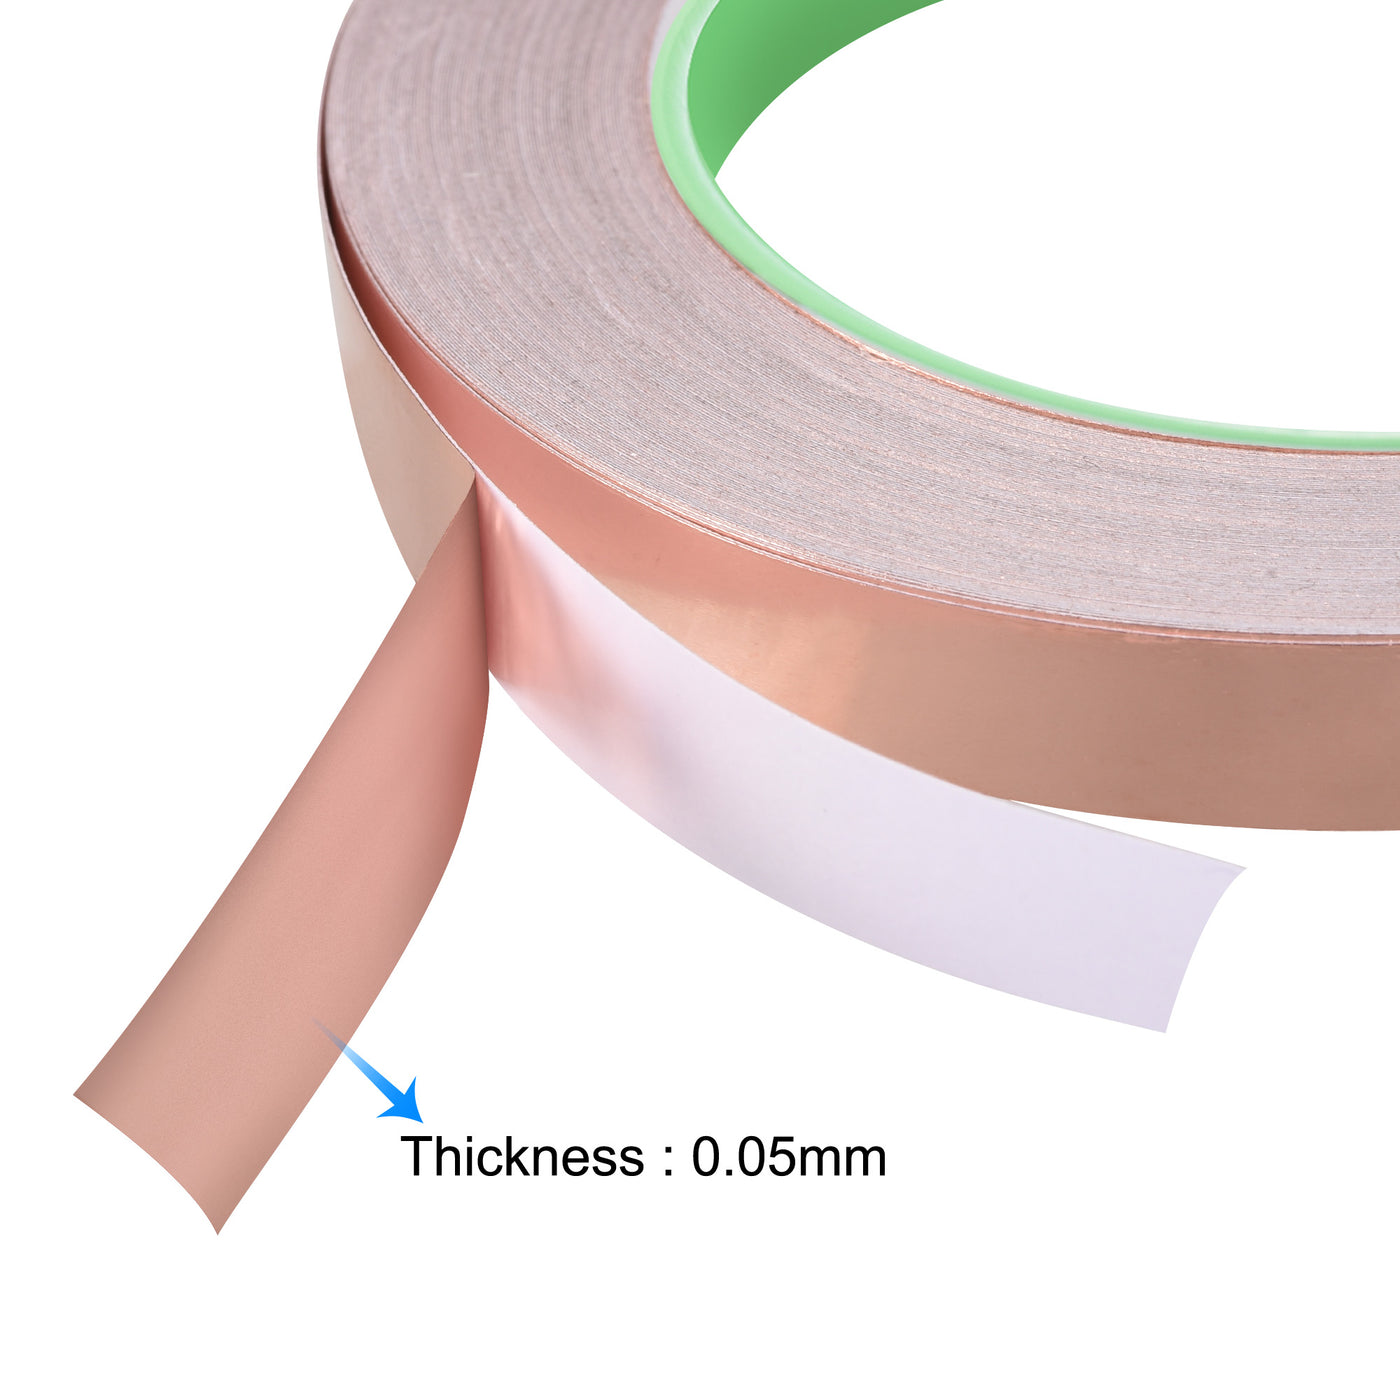 uxcell Uxcell Double-Sided Conductive Tape Copper Foil Tape 10mm x 30m/98.4ft 2pcs